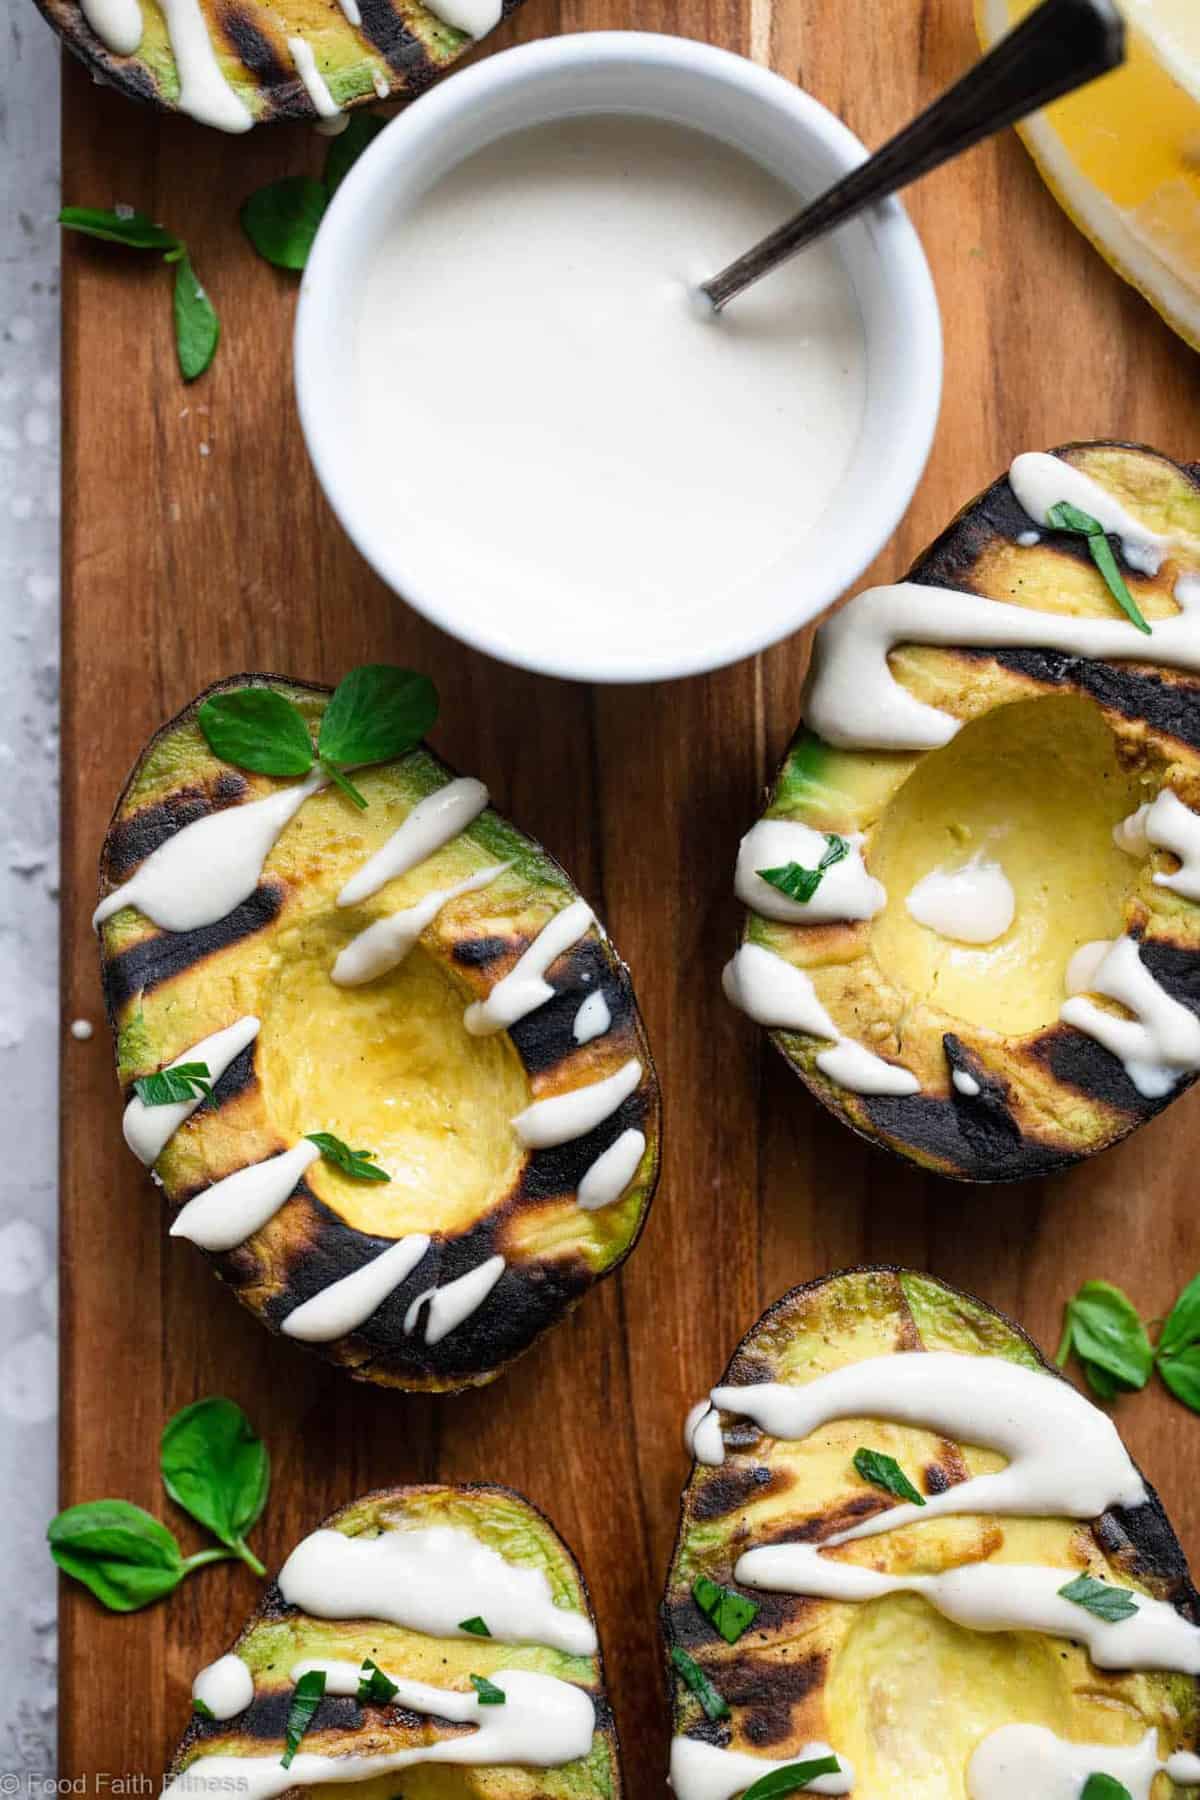 Grilled Avocado with Feta Tahini Sauce - These smoky and creamy grilled avocados are drizzled with a sweet and tangy feta and tahini sauce for an easy summer dinner that's healthy , keto, low carb and delicious! | #Foodfaithfitness | #Glutenfree #healthy #lowcarb #keto #grilling